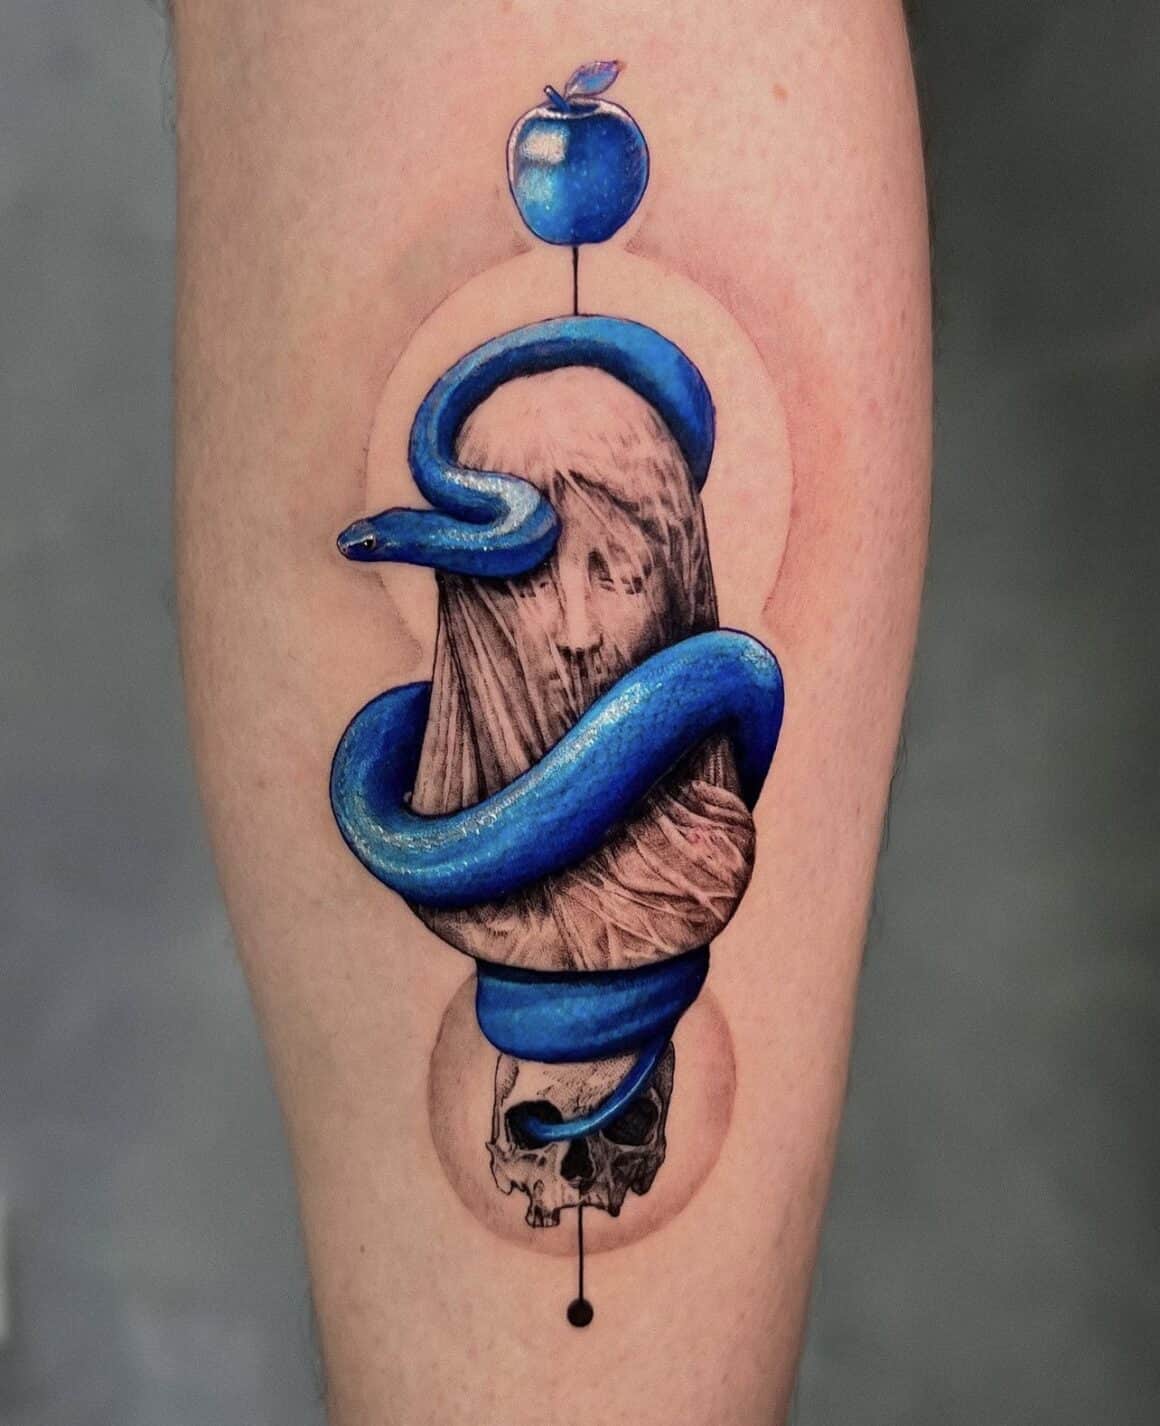 Everybody here has incredible and intricate tattoos, so I'd like to change  it up a bit. A very practical tattoo. : r/TattooDesigns